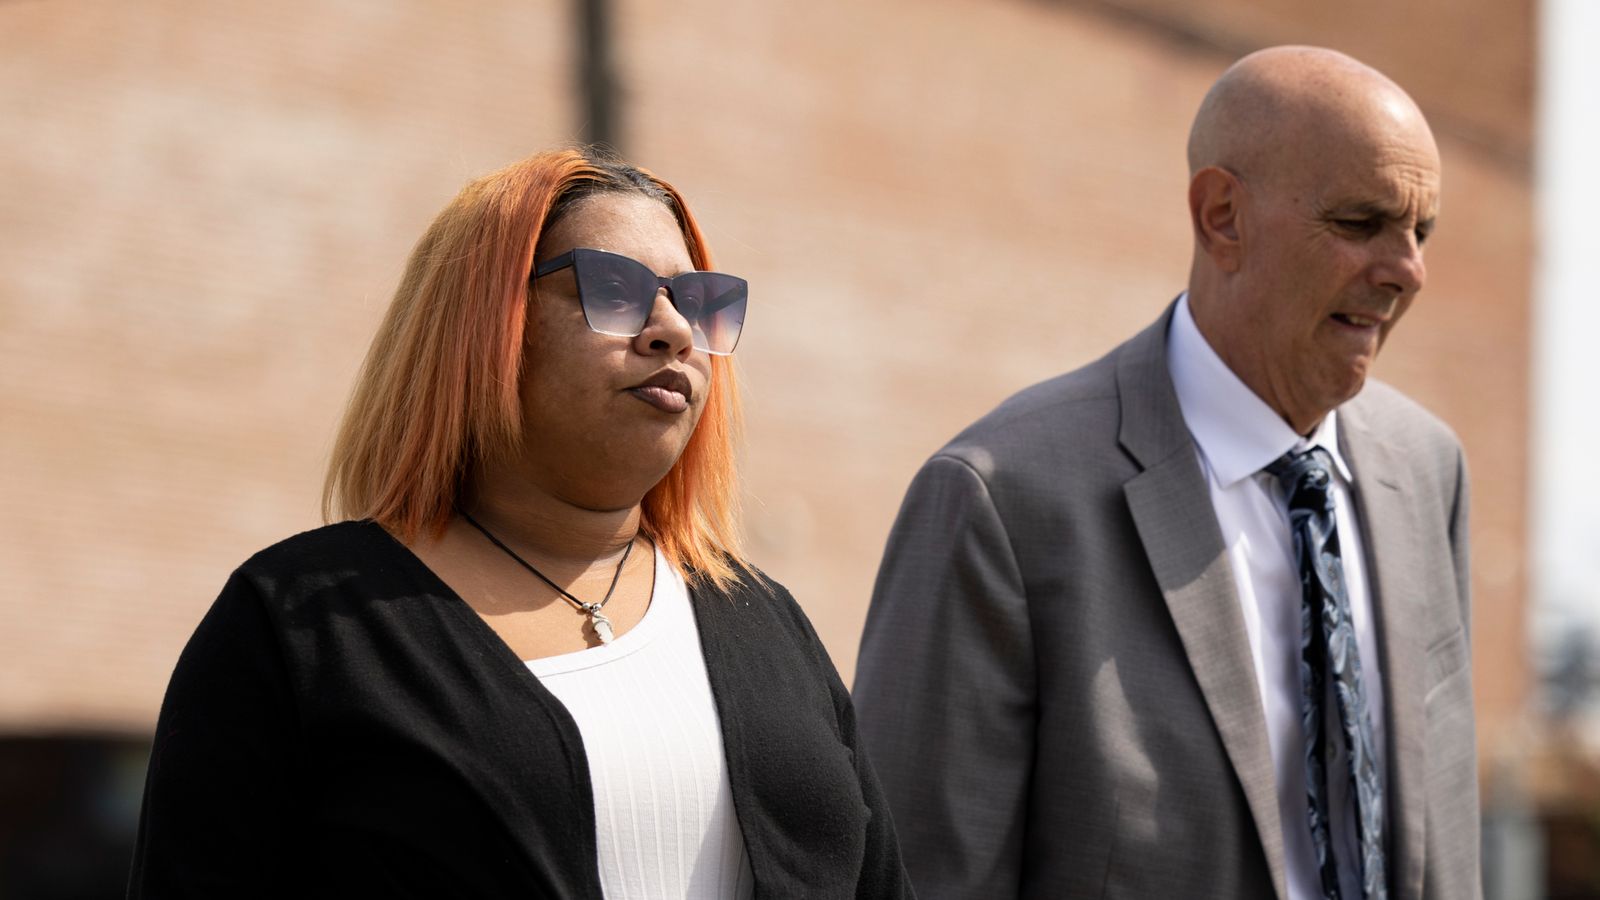 Mother of child who shot Virginia teacher sentenced to 21 months in prison 